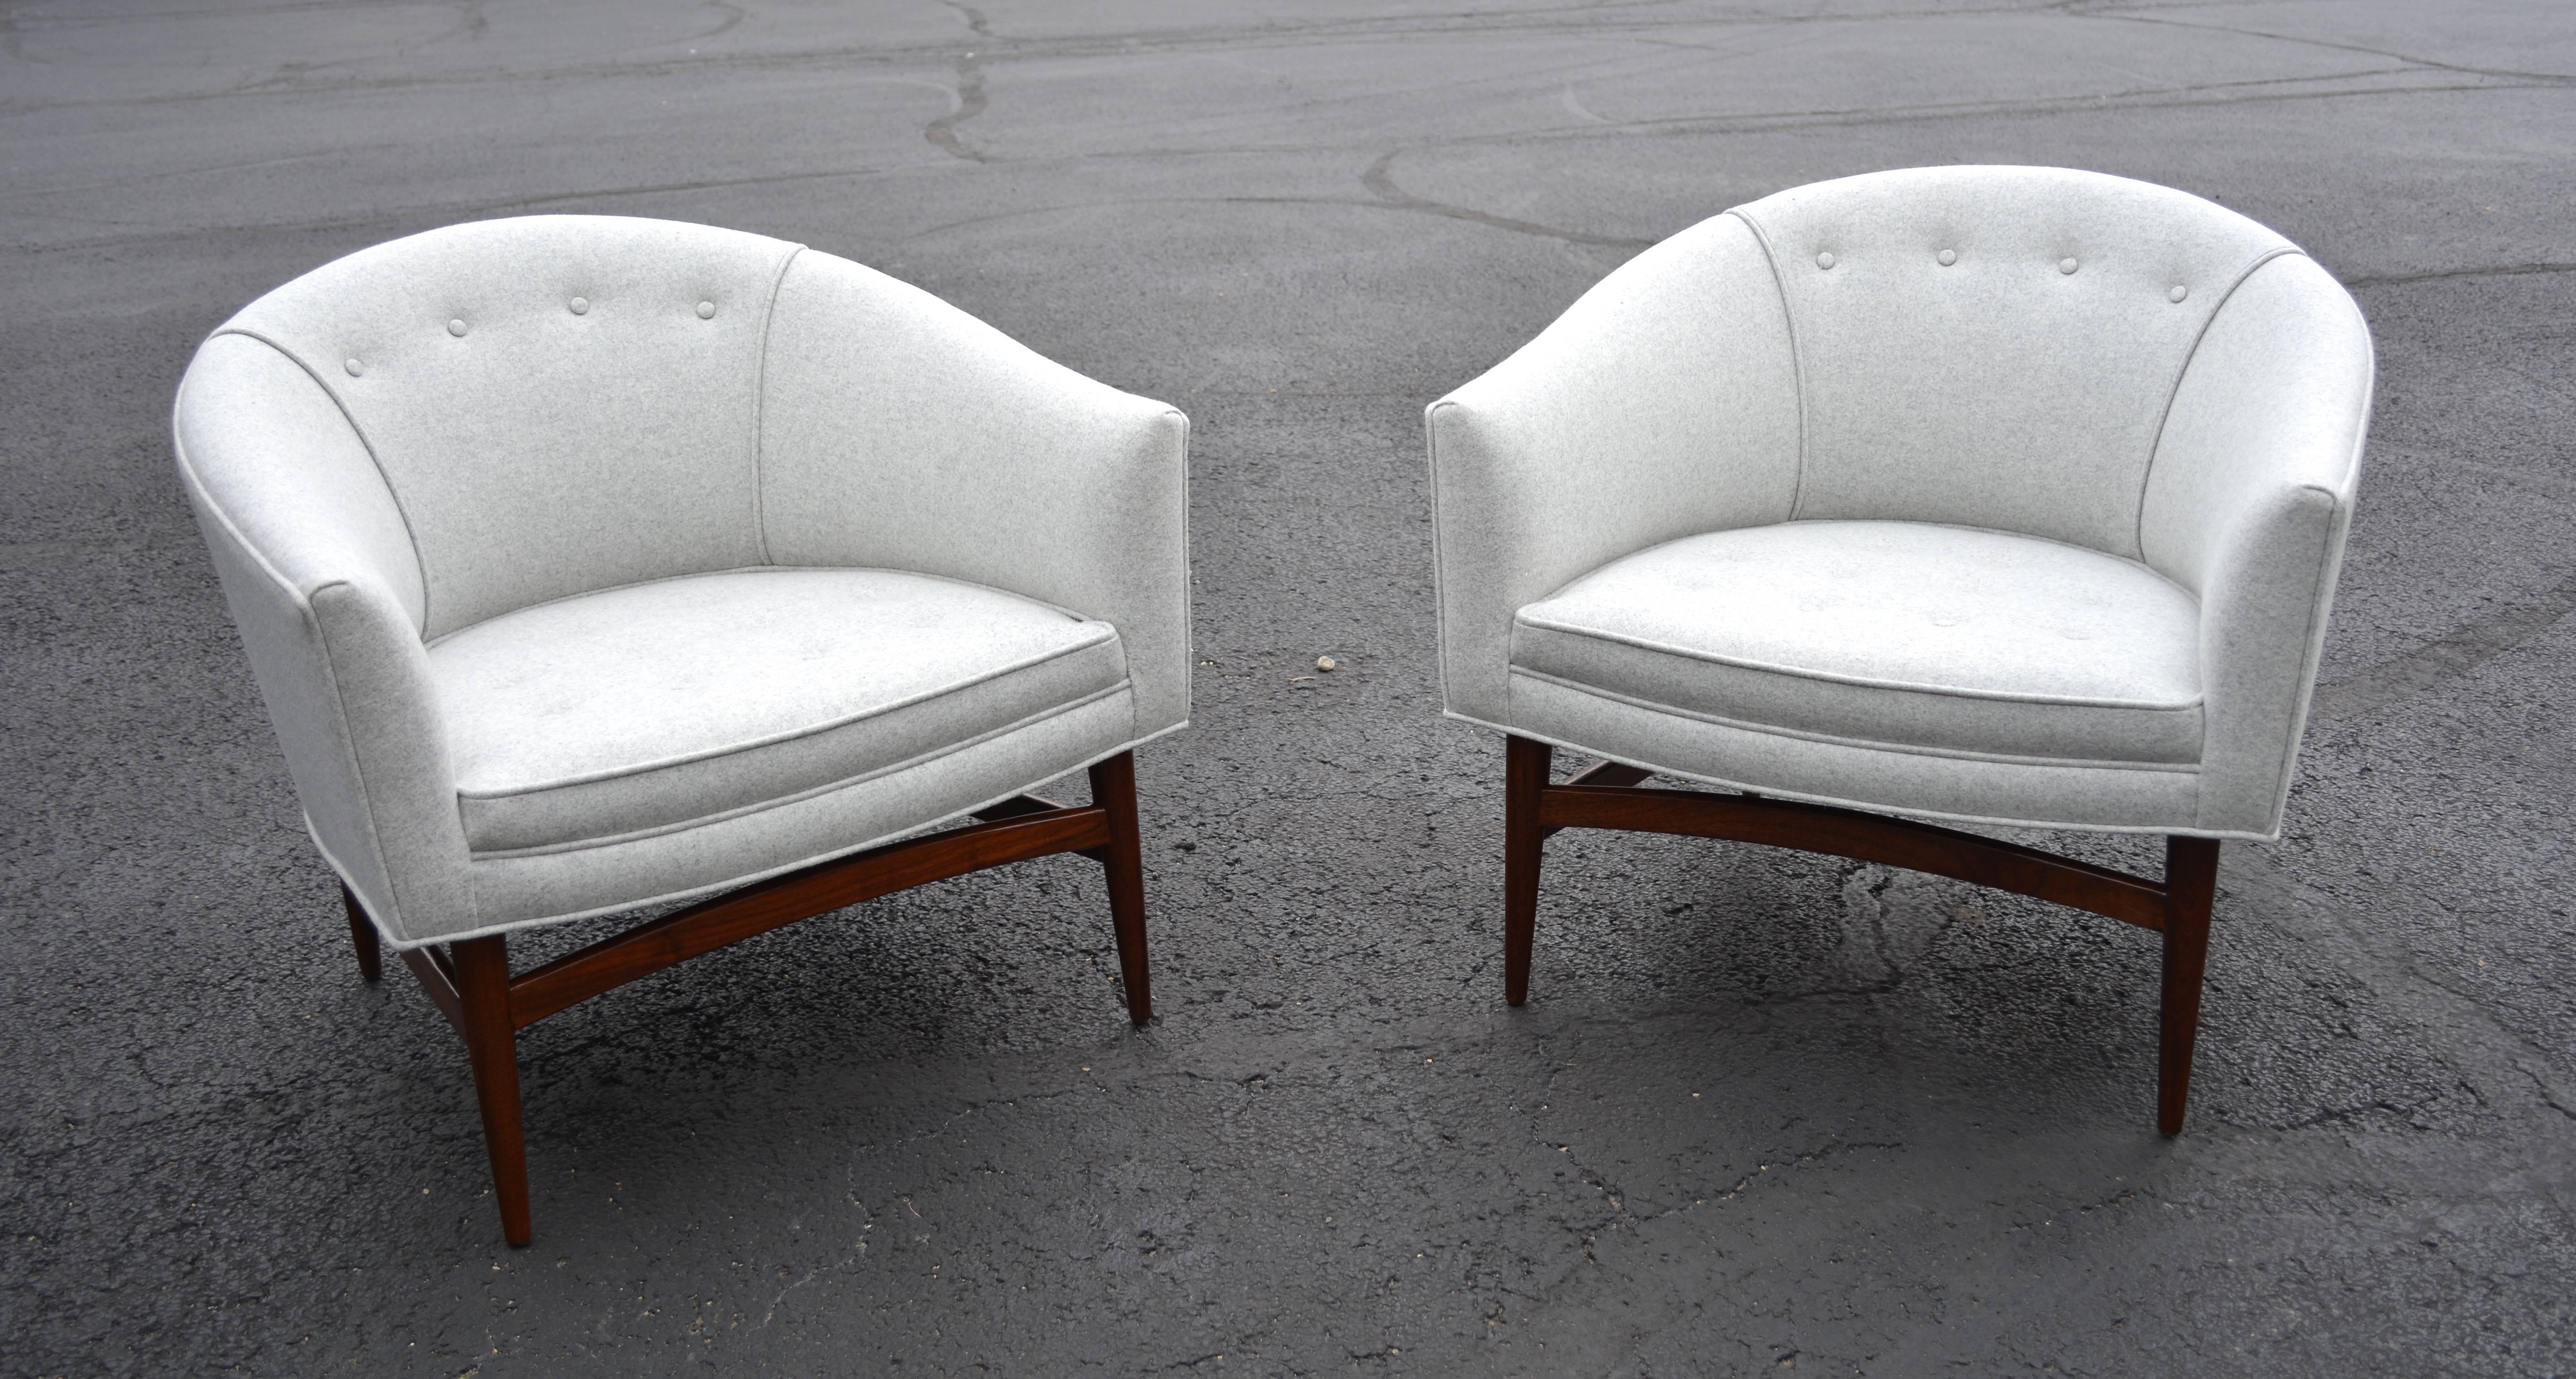 American Pair of Lawrence Peabody Mid-Century Modern Lounge Chairs